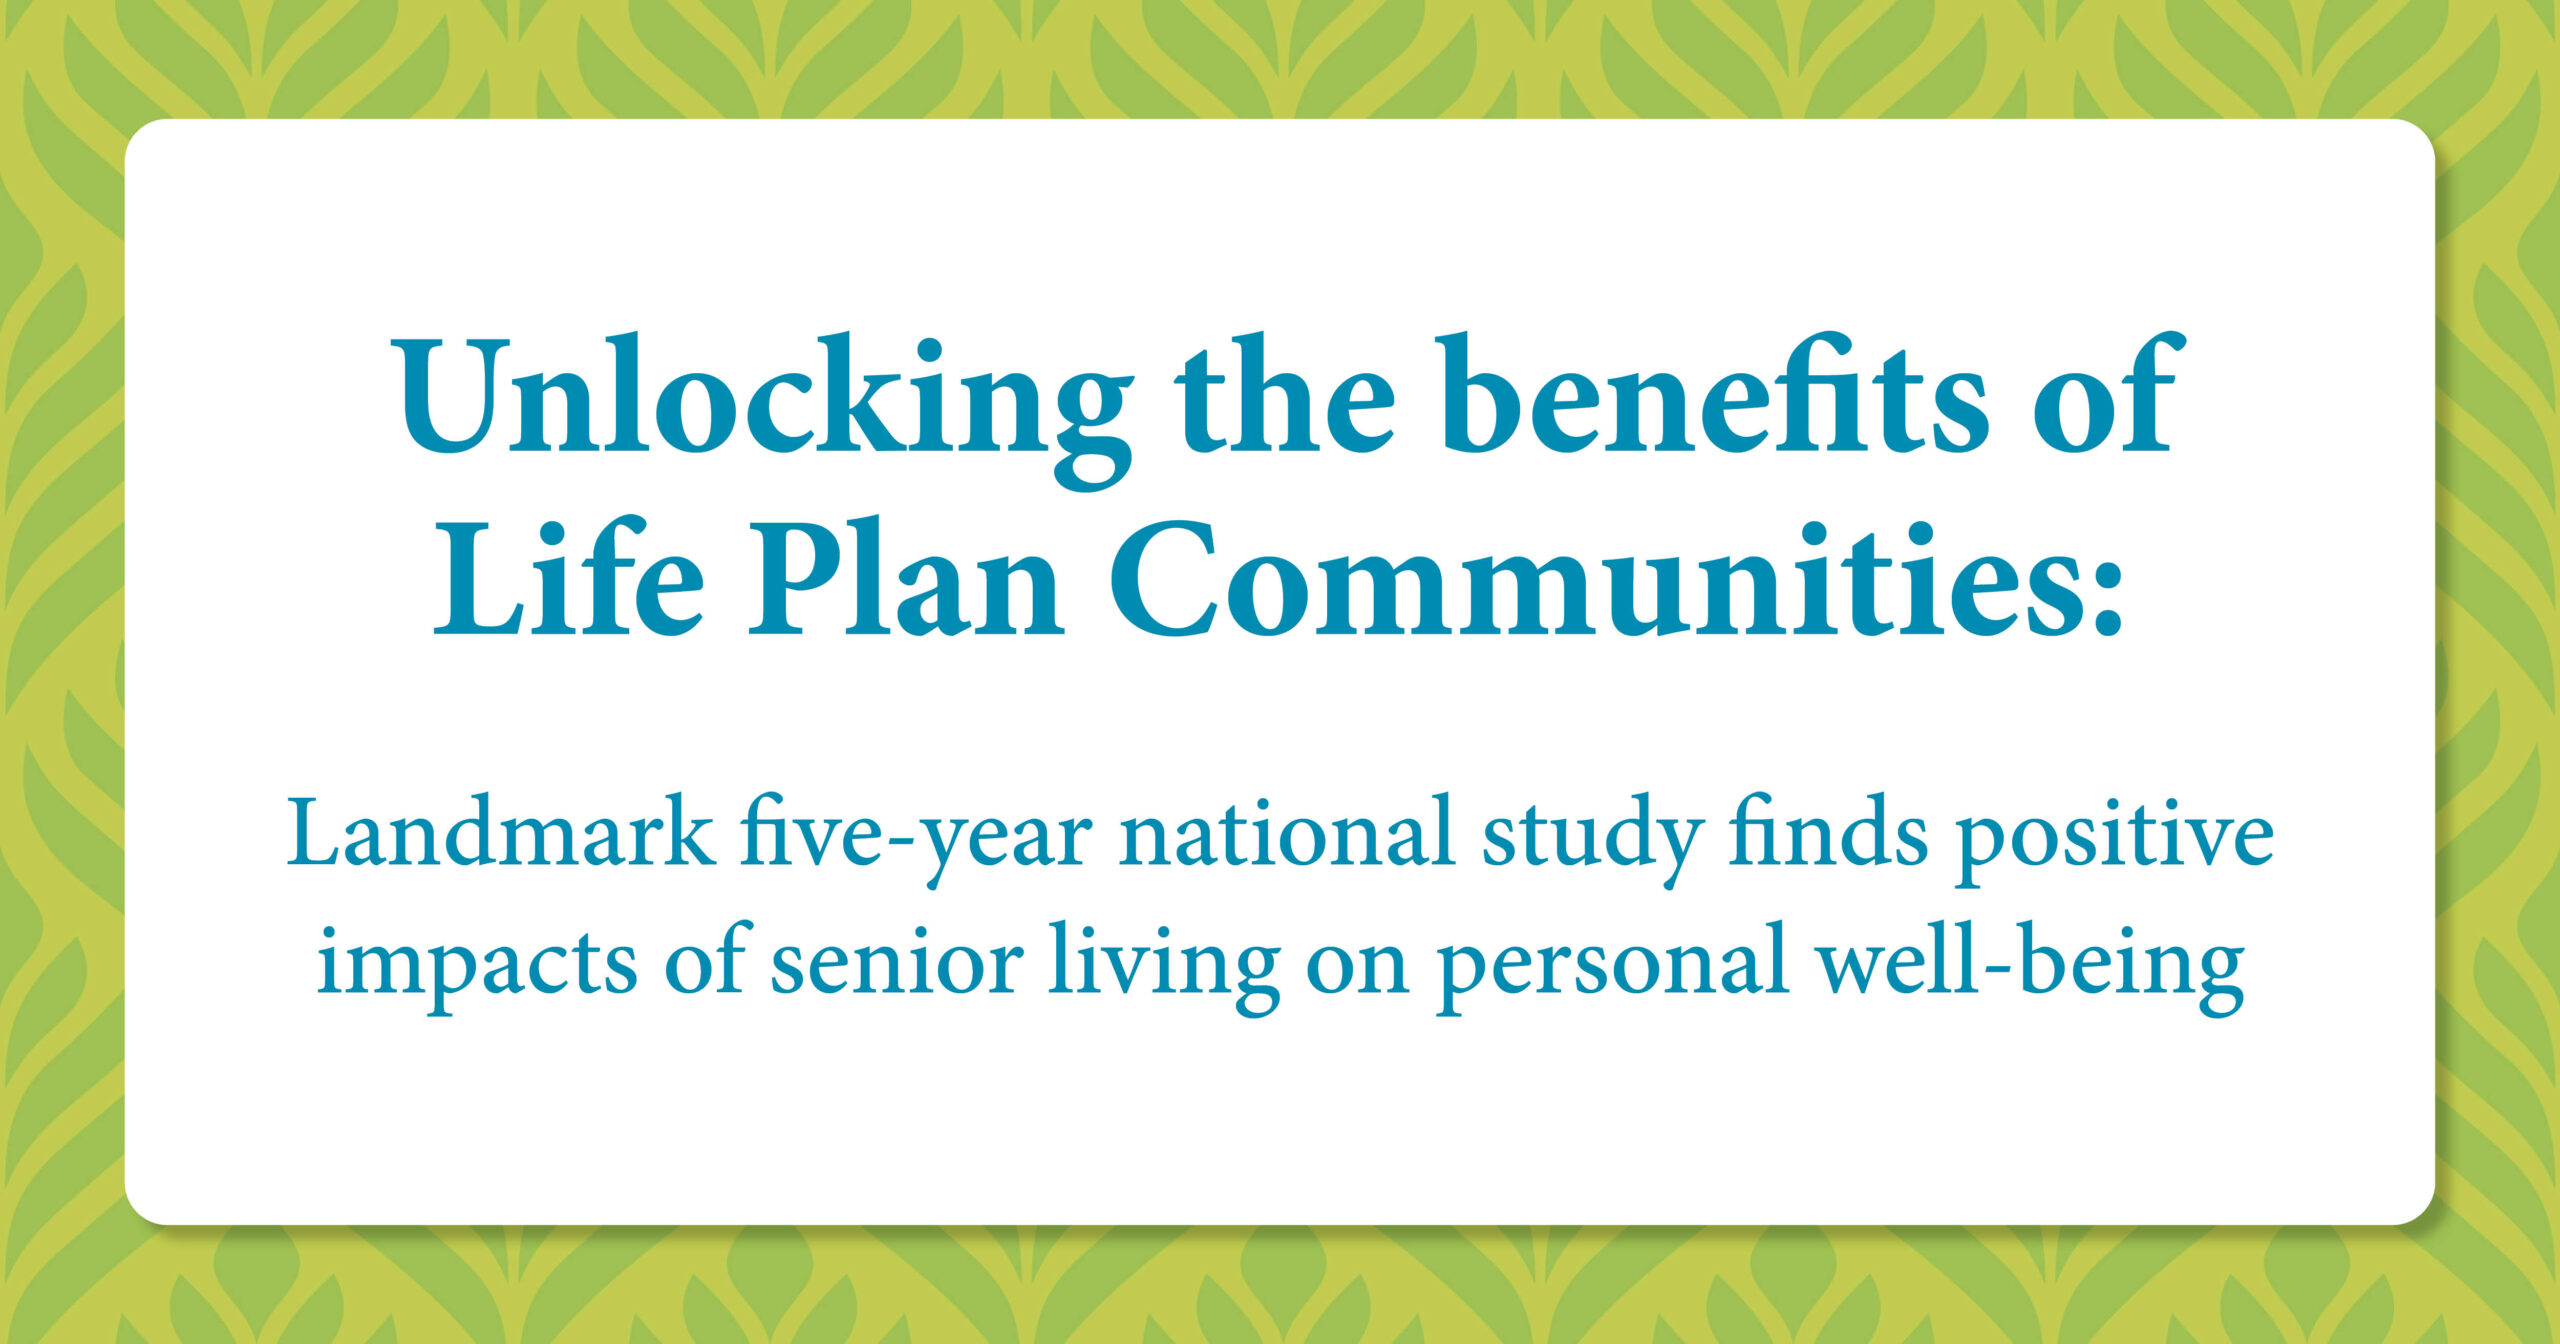 Unlocking the benefits of Life Plan Communities: Landmark five-year national study finds positive impacts of senior living on personal well-being